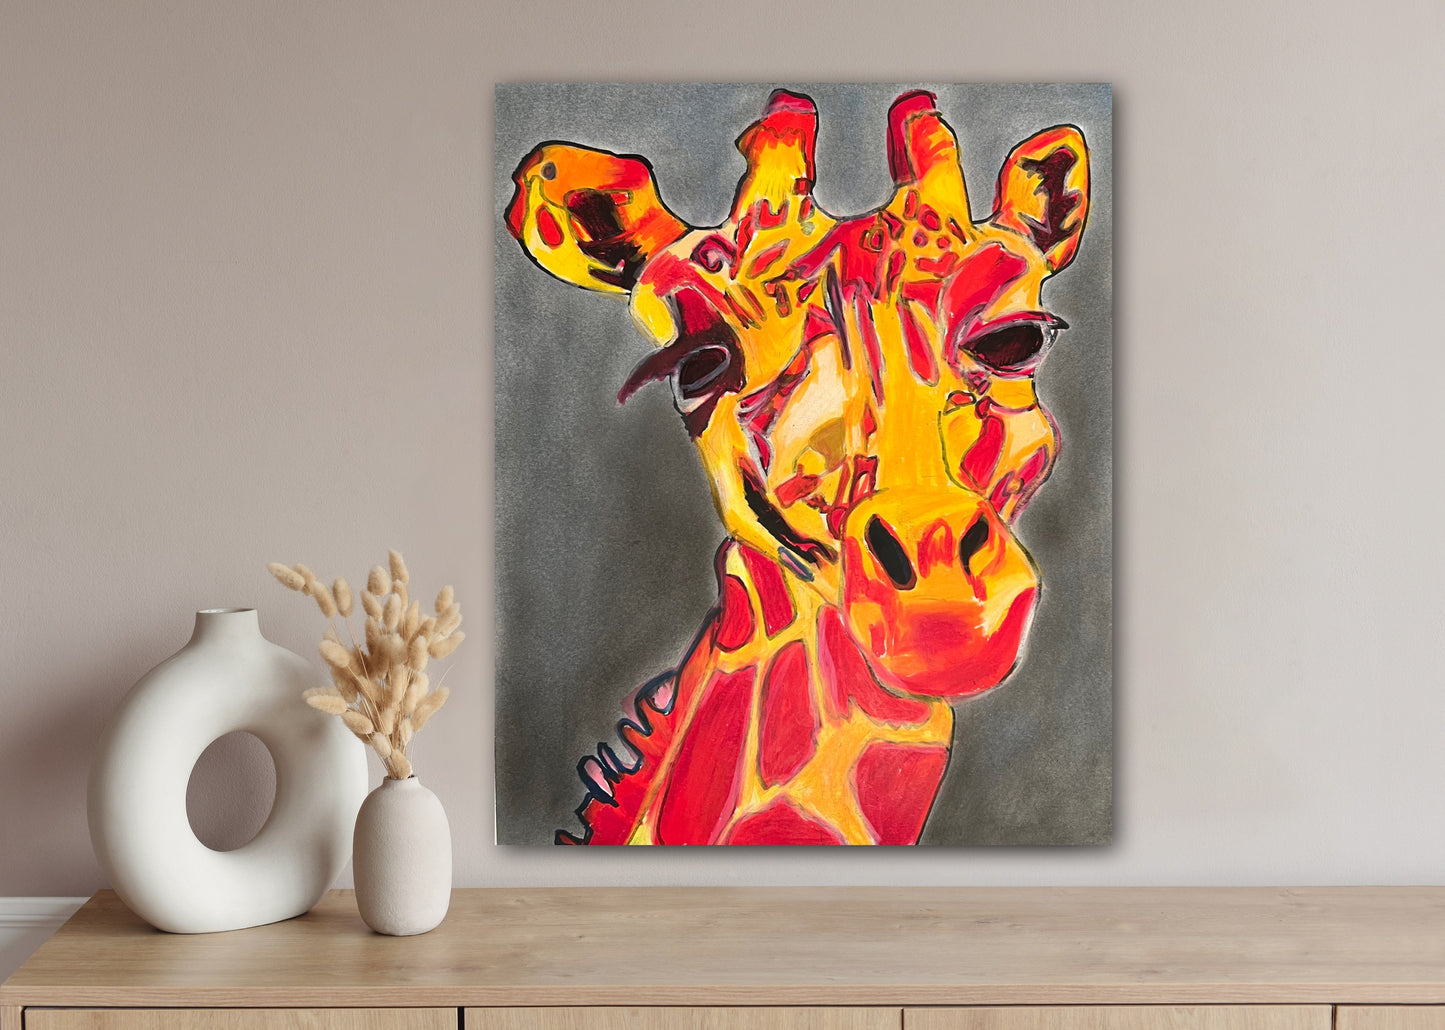 Red Giraffe - Stretched Canvas Print in more sizes